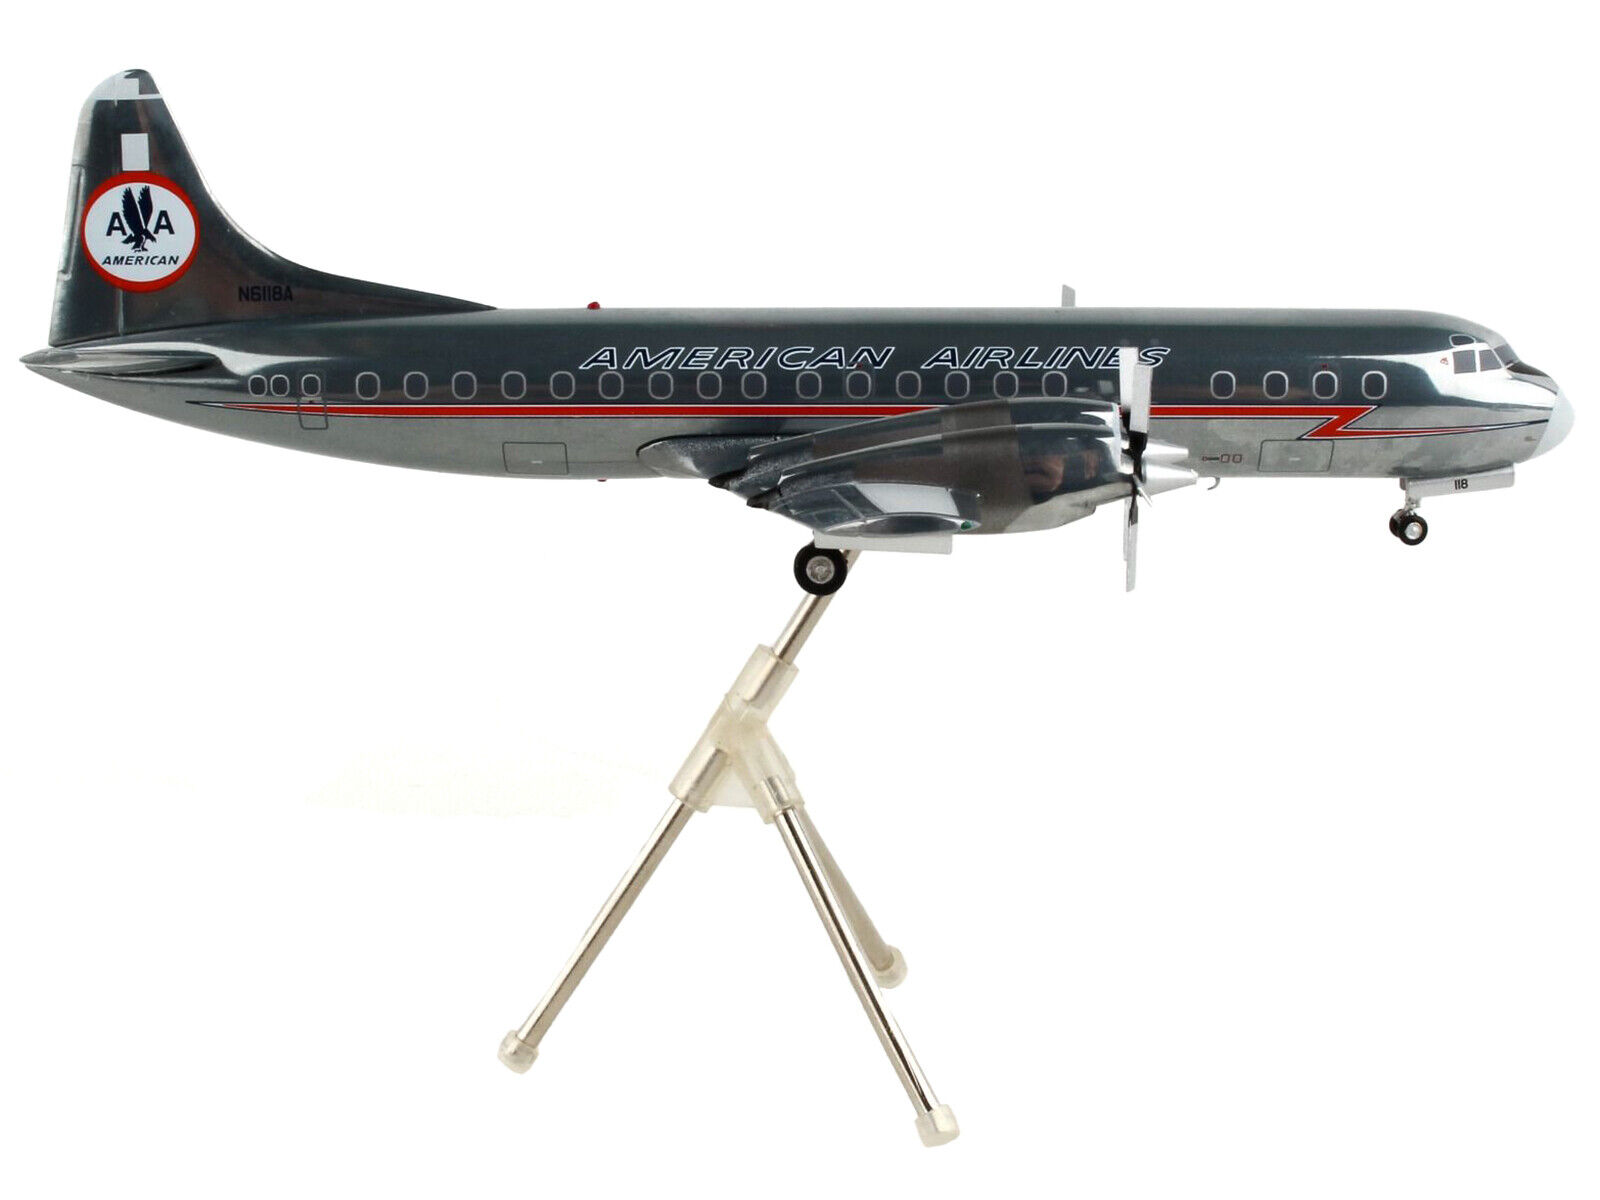 Lockheed L-188A Electra Astrojet Commercial Aircraft \